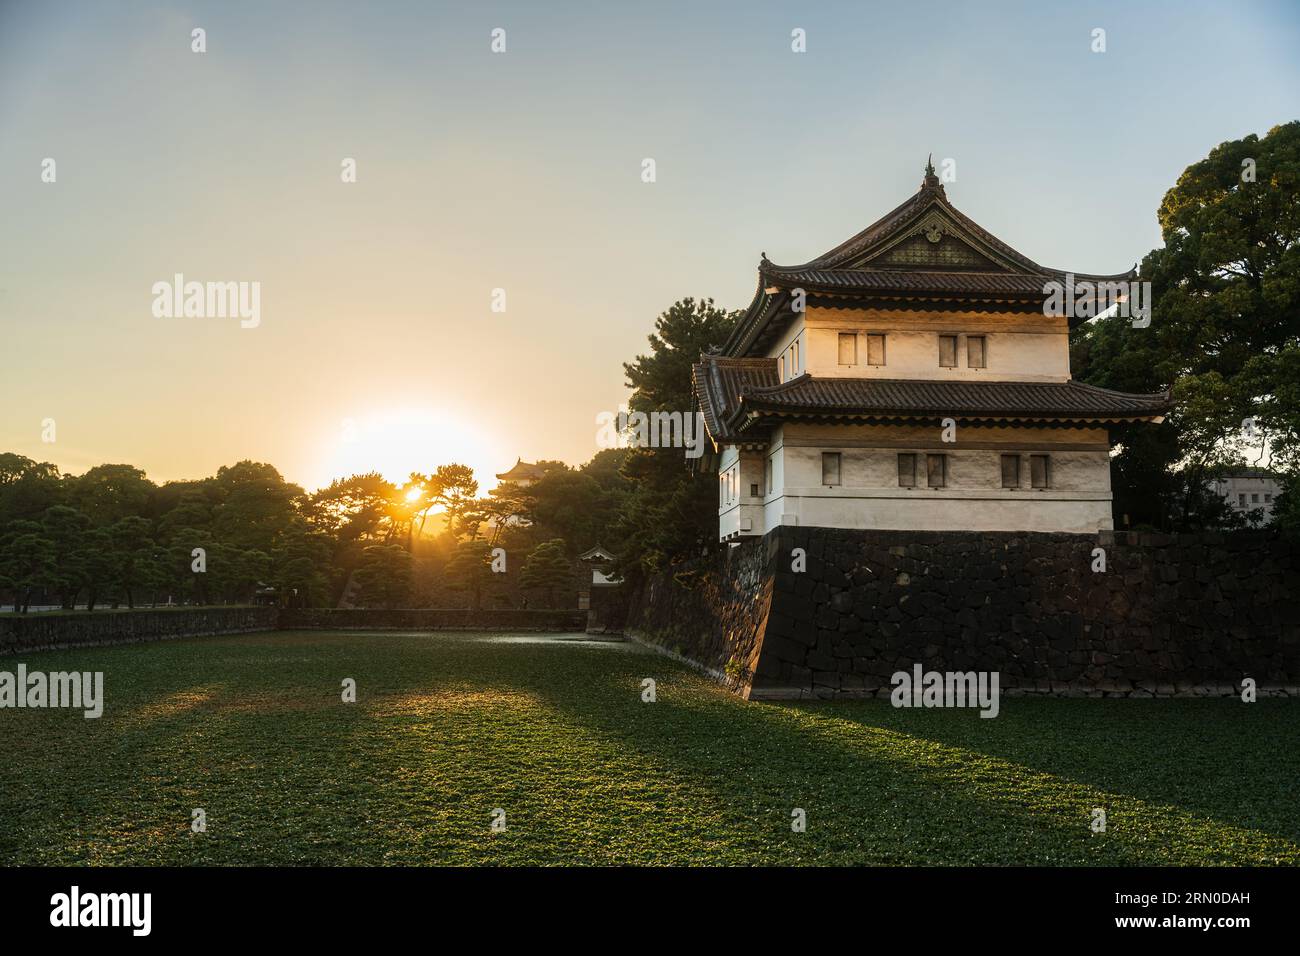 Tokyo Imperial Palace photographed at sunset. Beautiful sky over the Castle from Edo Period in Japan. Stock Photo